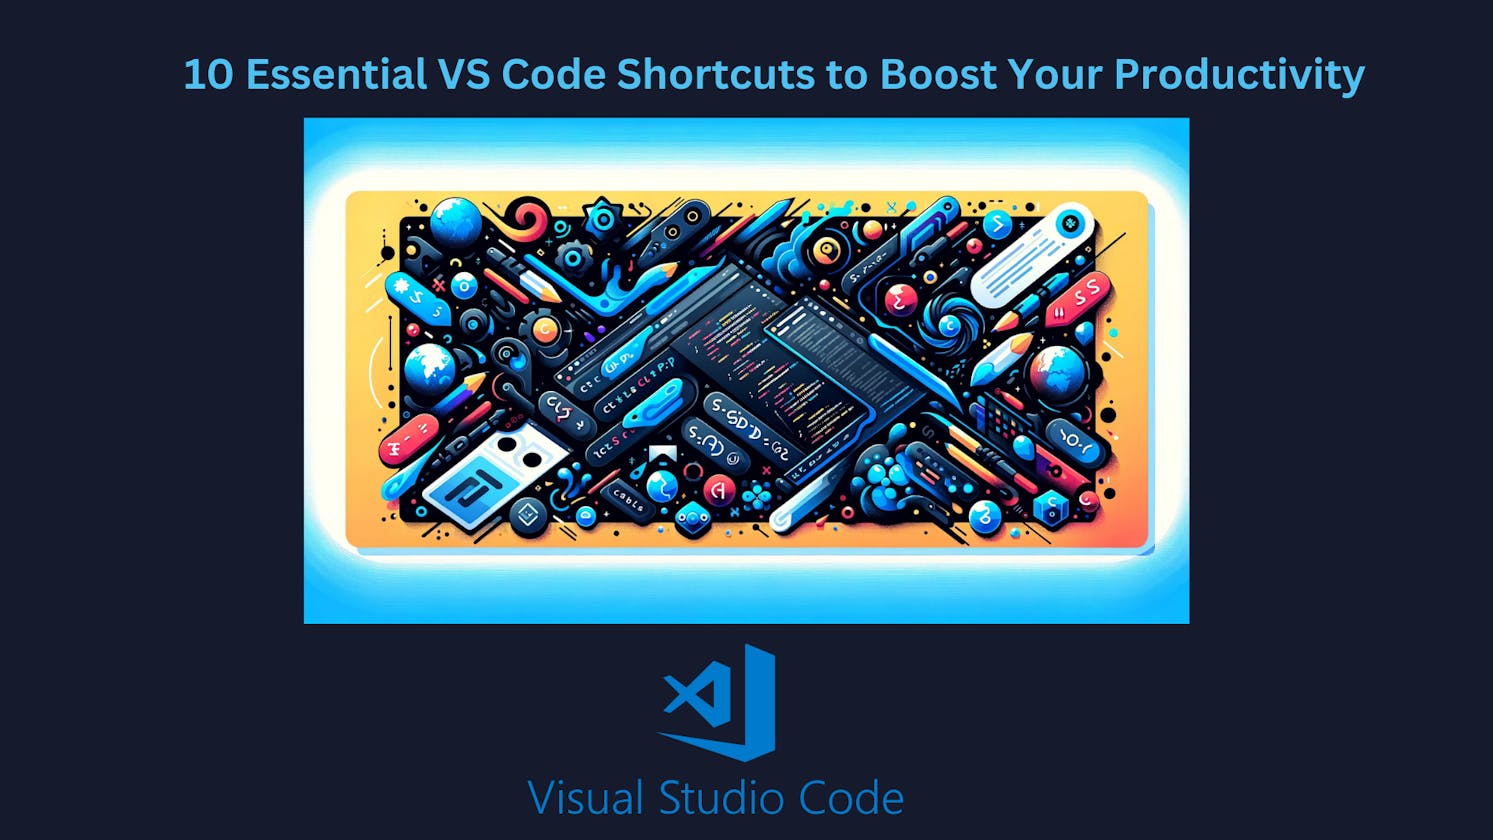 10 Essential VS Code Shortcuts to Boost Your Productivity